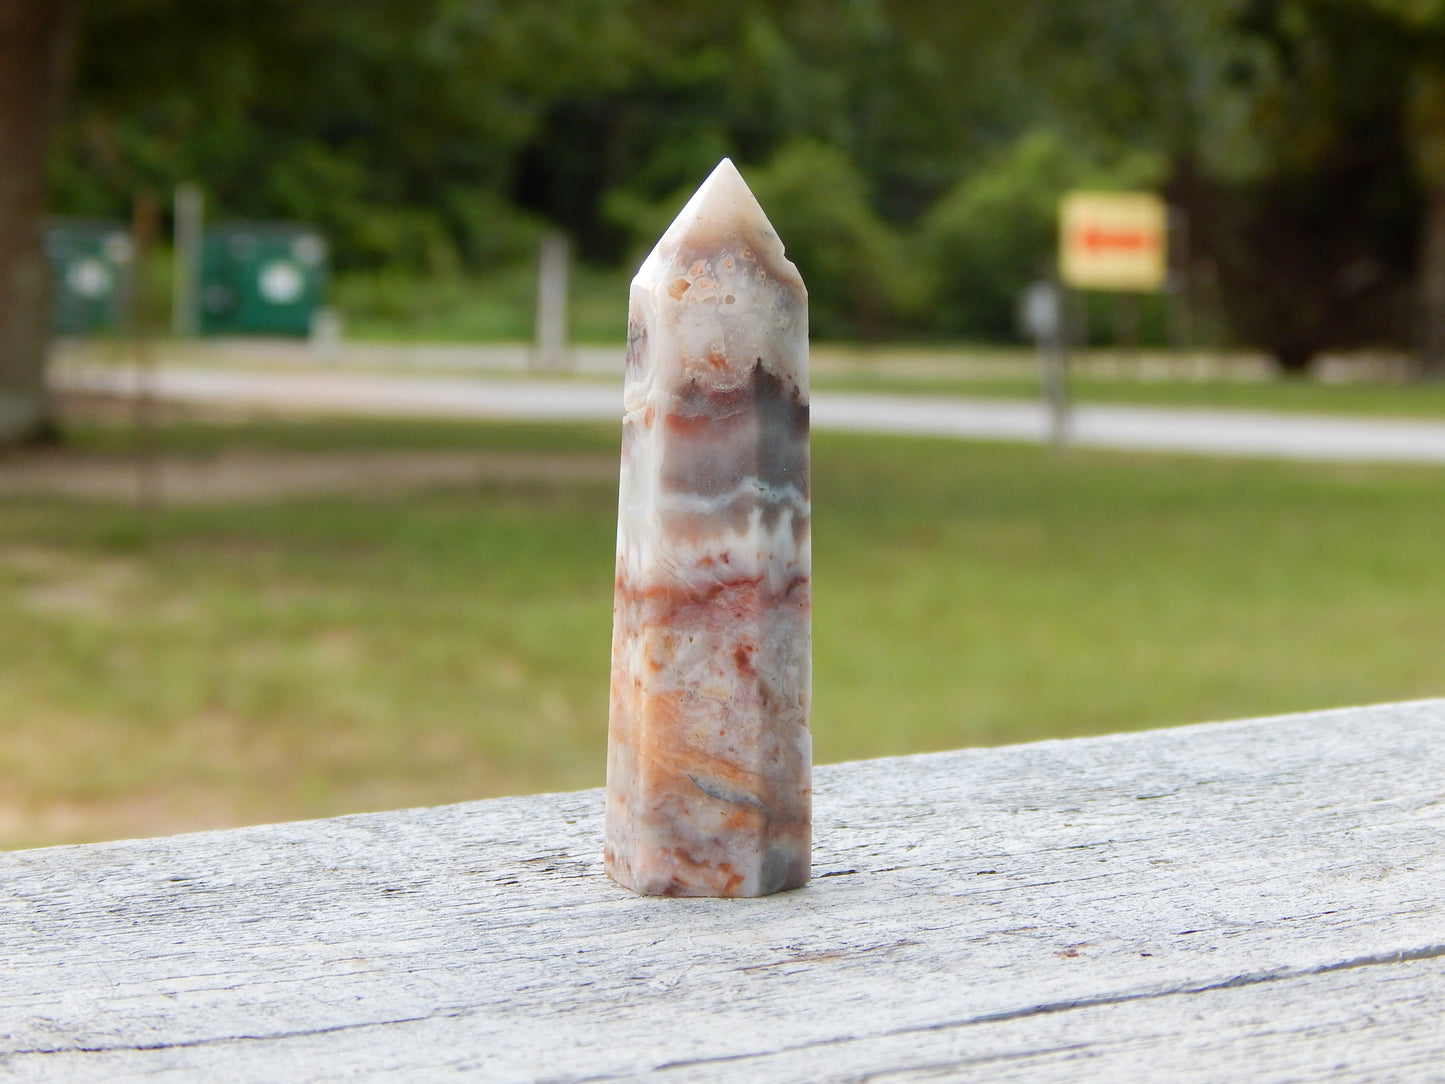 Crazy lace agate tower